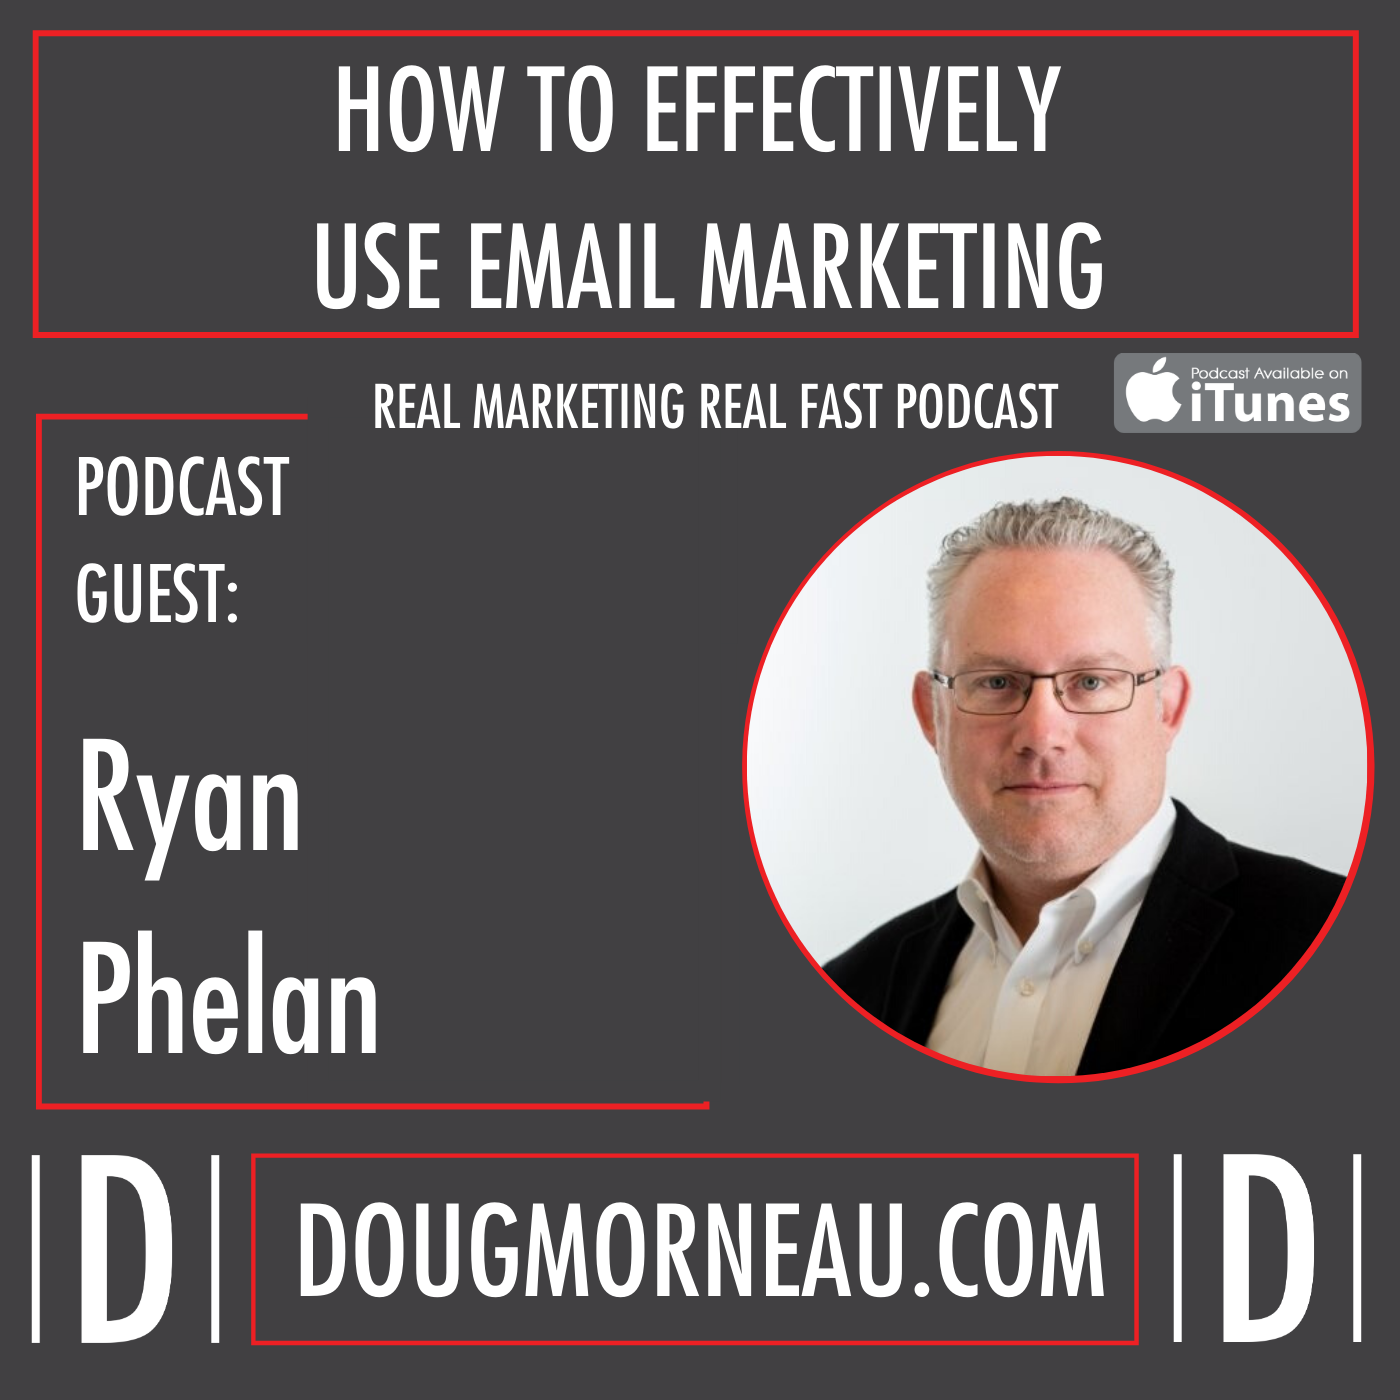 HOW TO EFFECTIVELY USE EMAIL MARKETING – RYAN PHELAN - DOUG MORNEAU - REAL MARKETING REAL FAST PODCAST